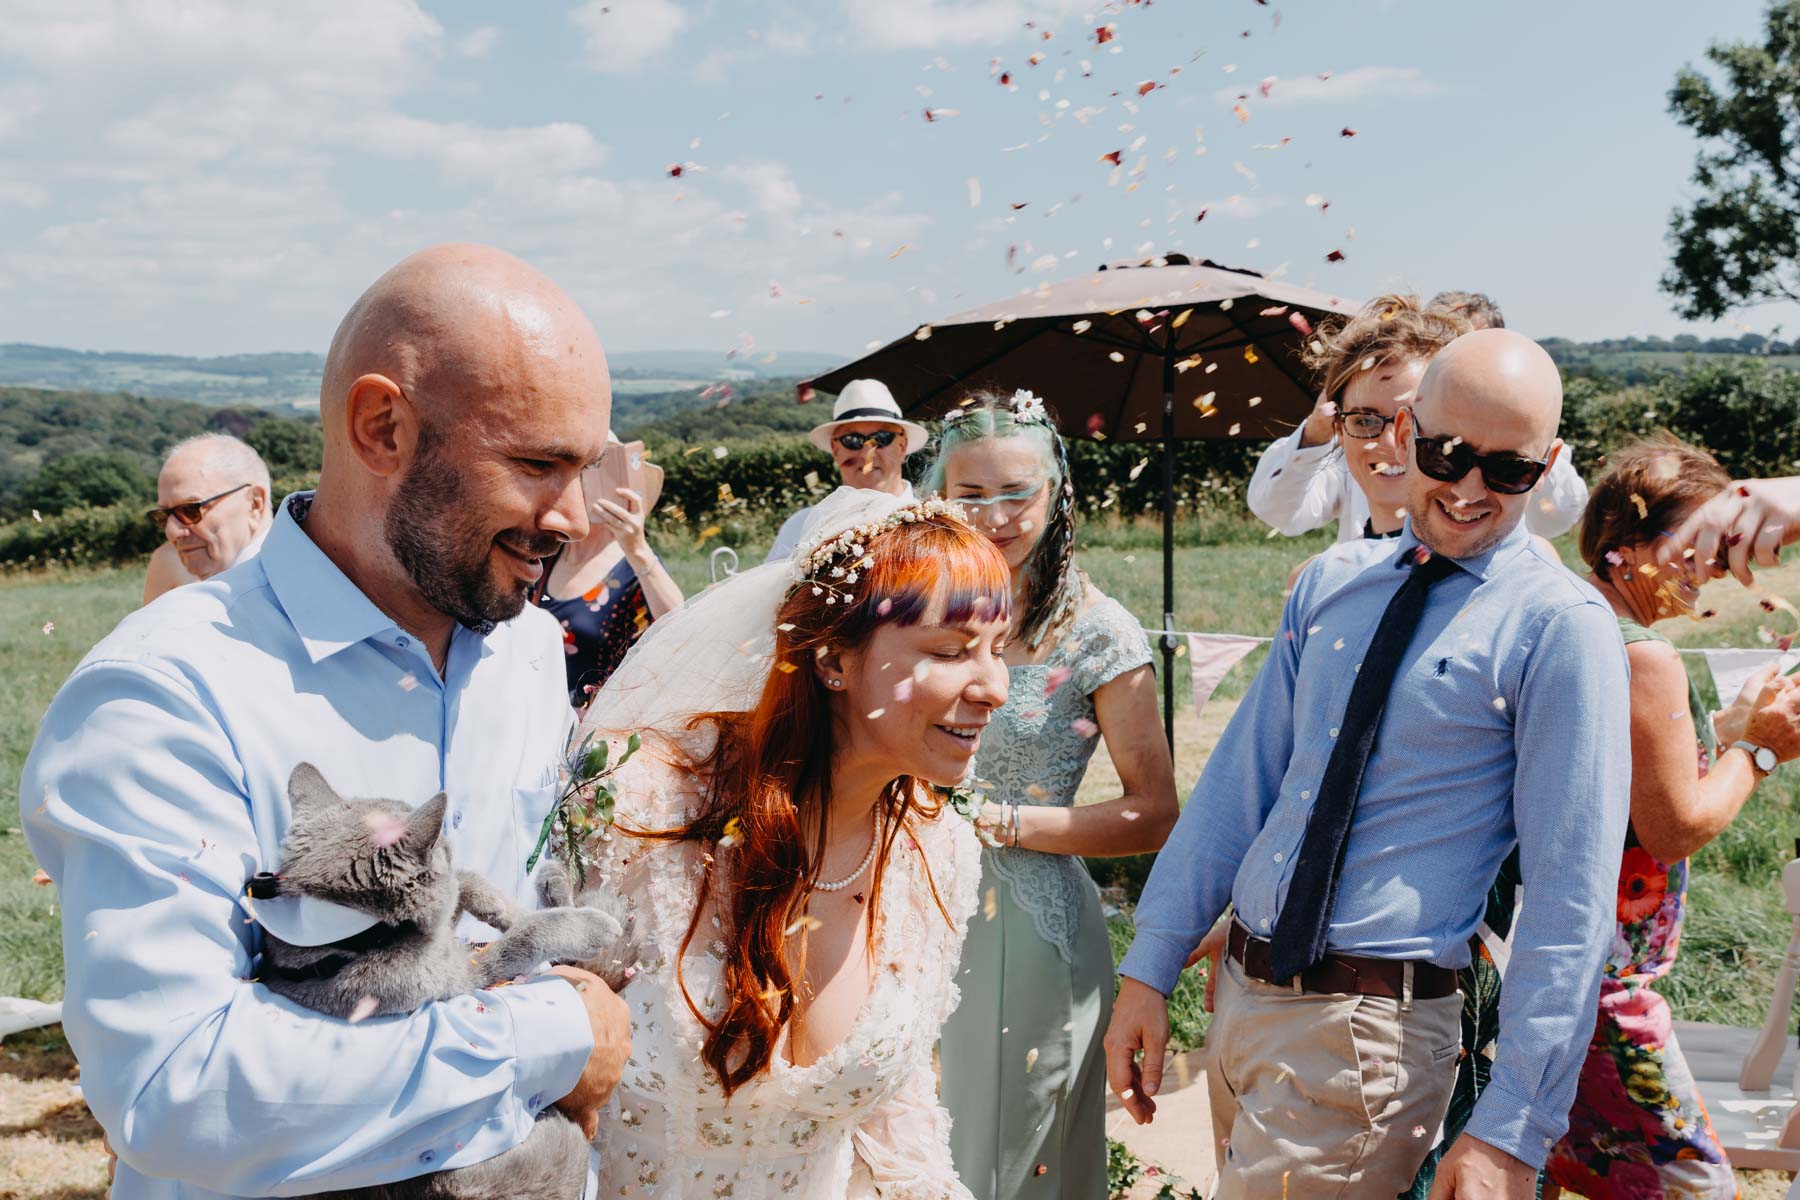 The bride and groom sprinkled with confetti after handfasting ceremony